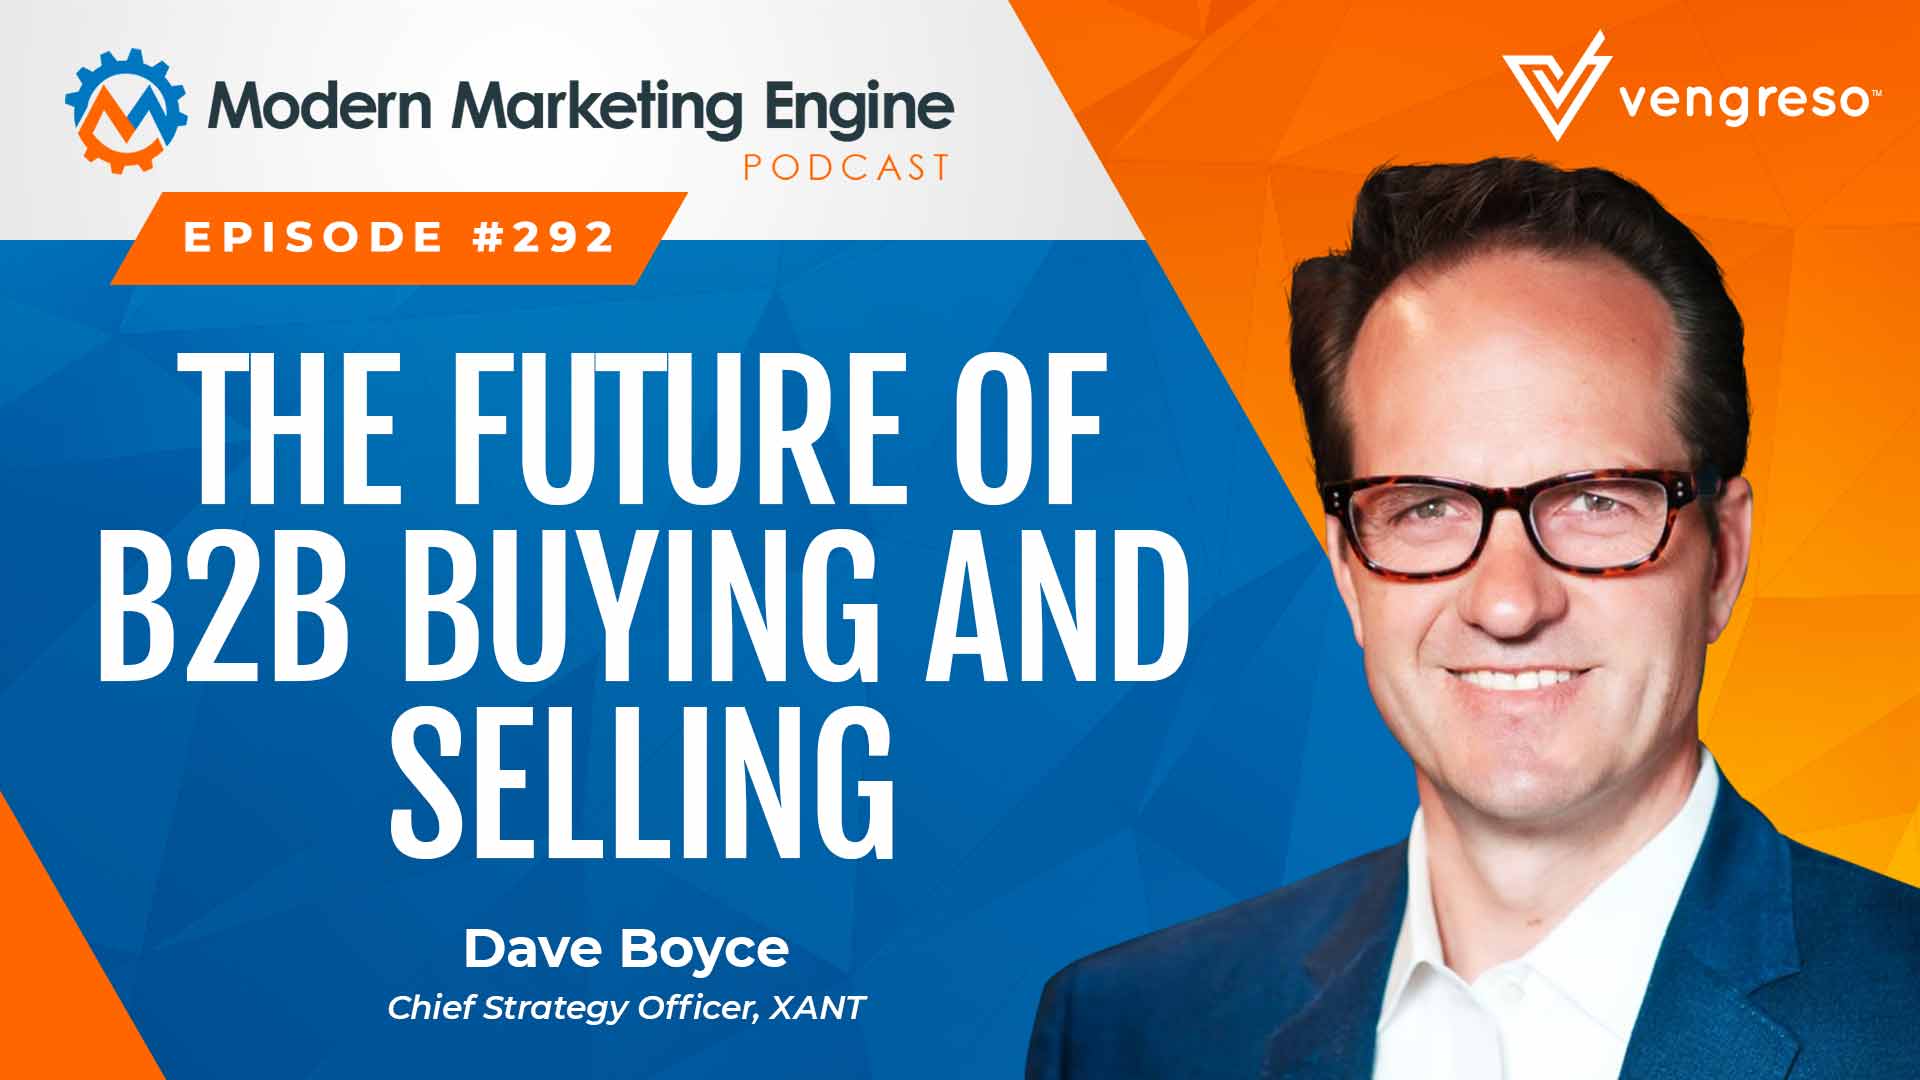 The Future of B2B Buying and Selling